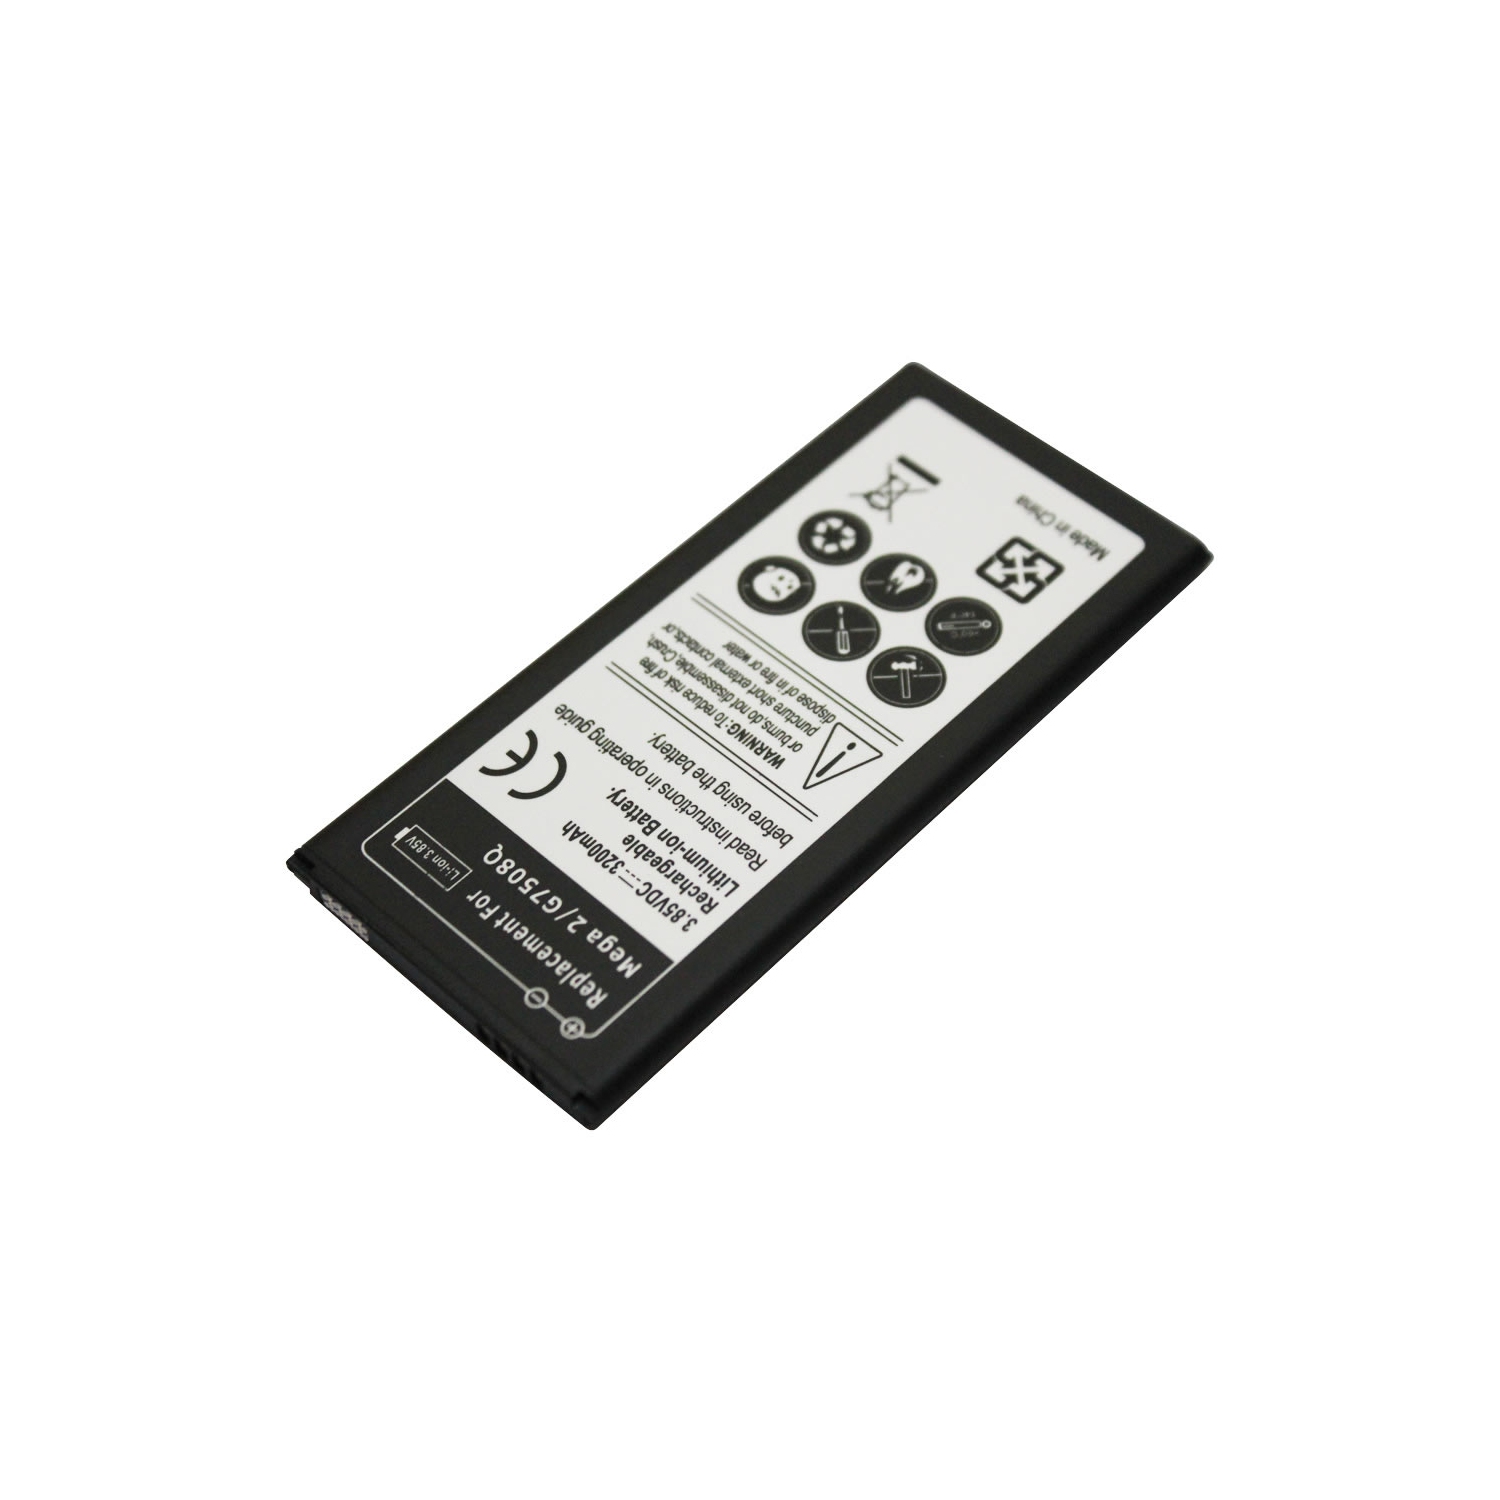 Dr. Battery - Canadian Brand Replacement Battery for Samsung Galaxy Mega 2 - Free Shipping - 1 year limited warranty